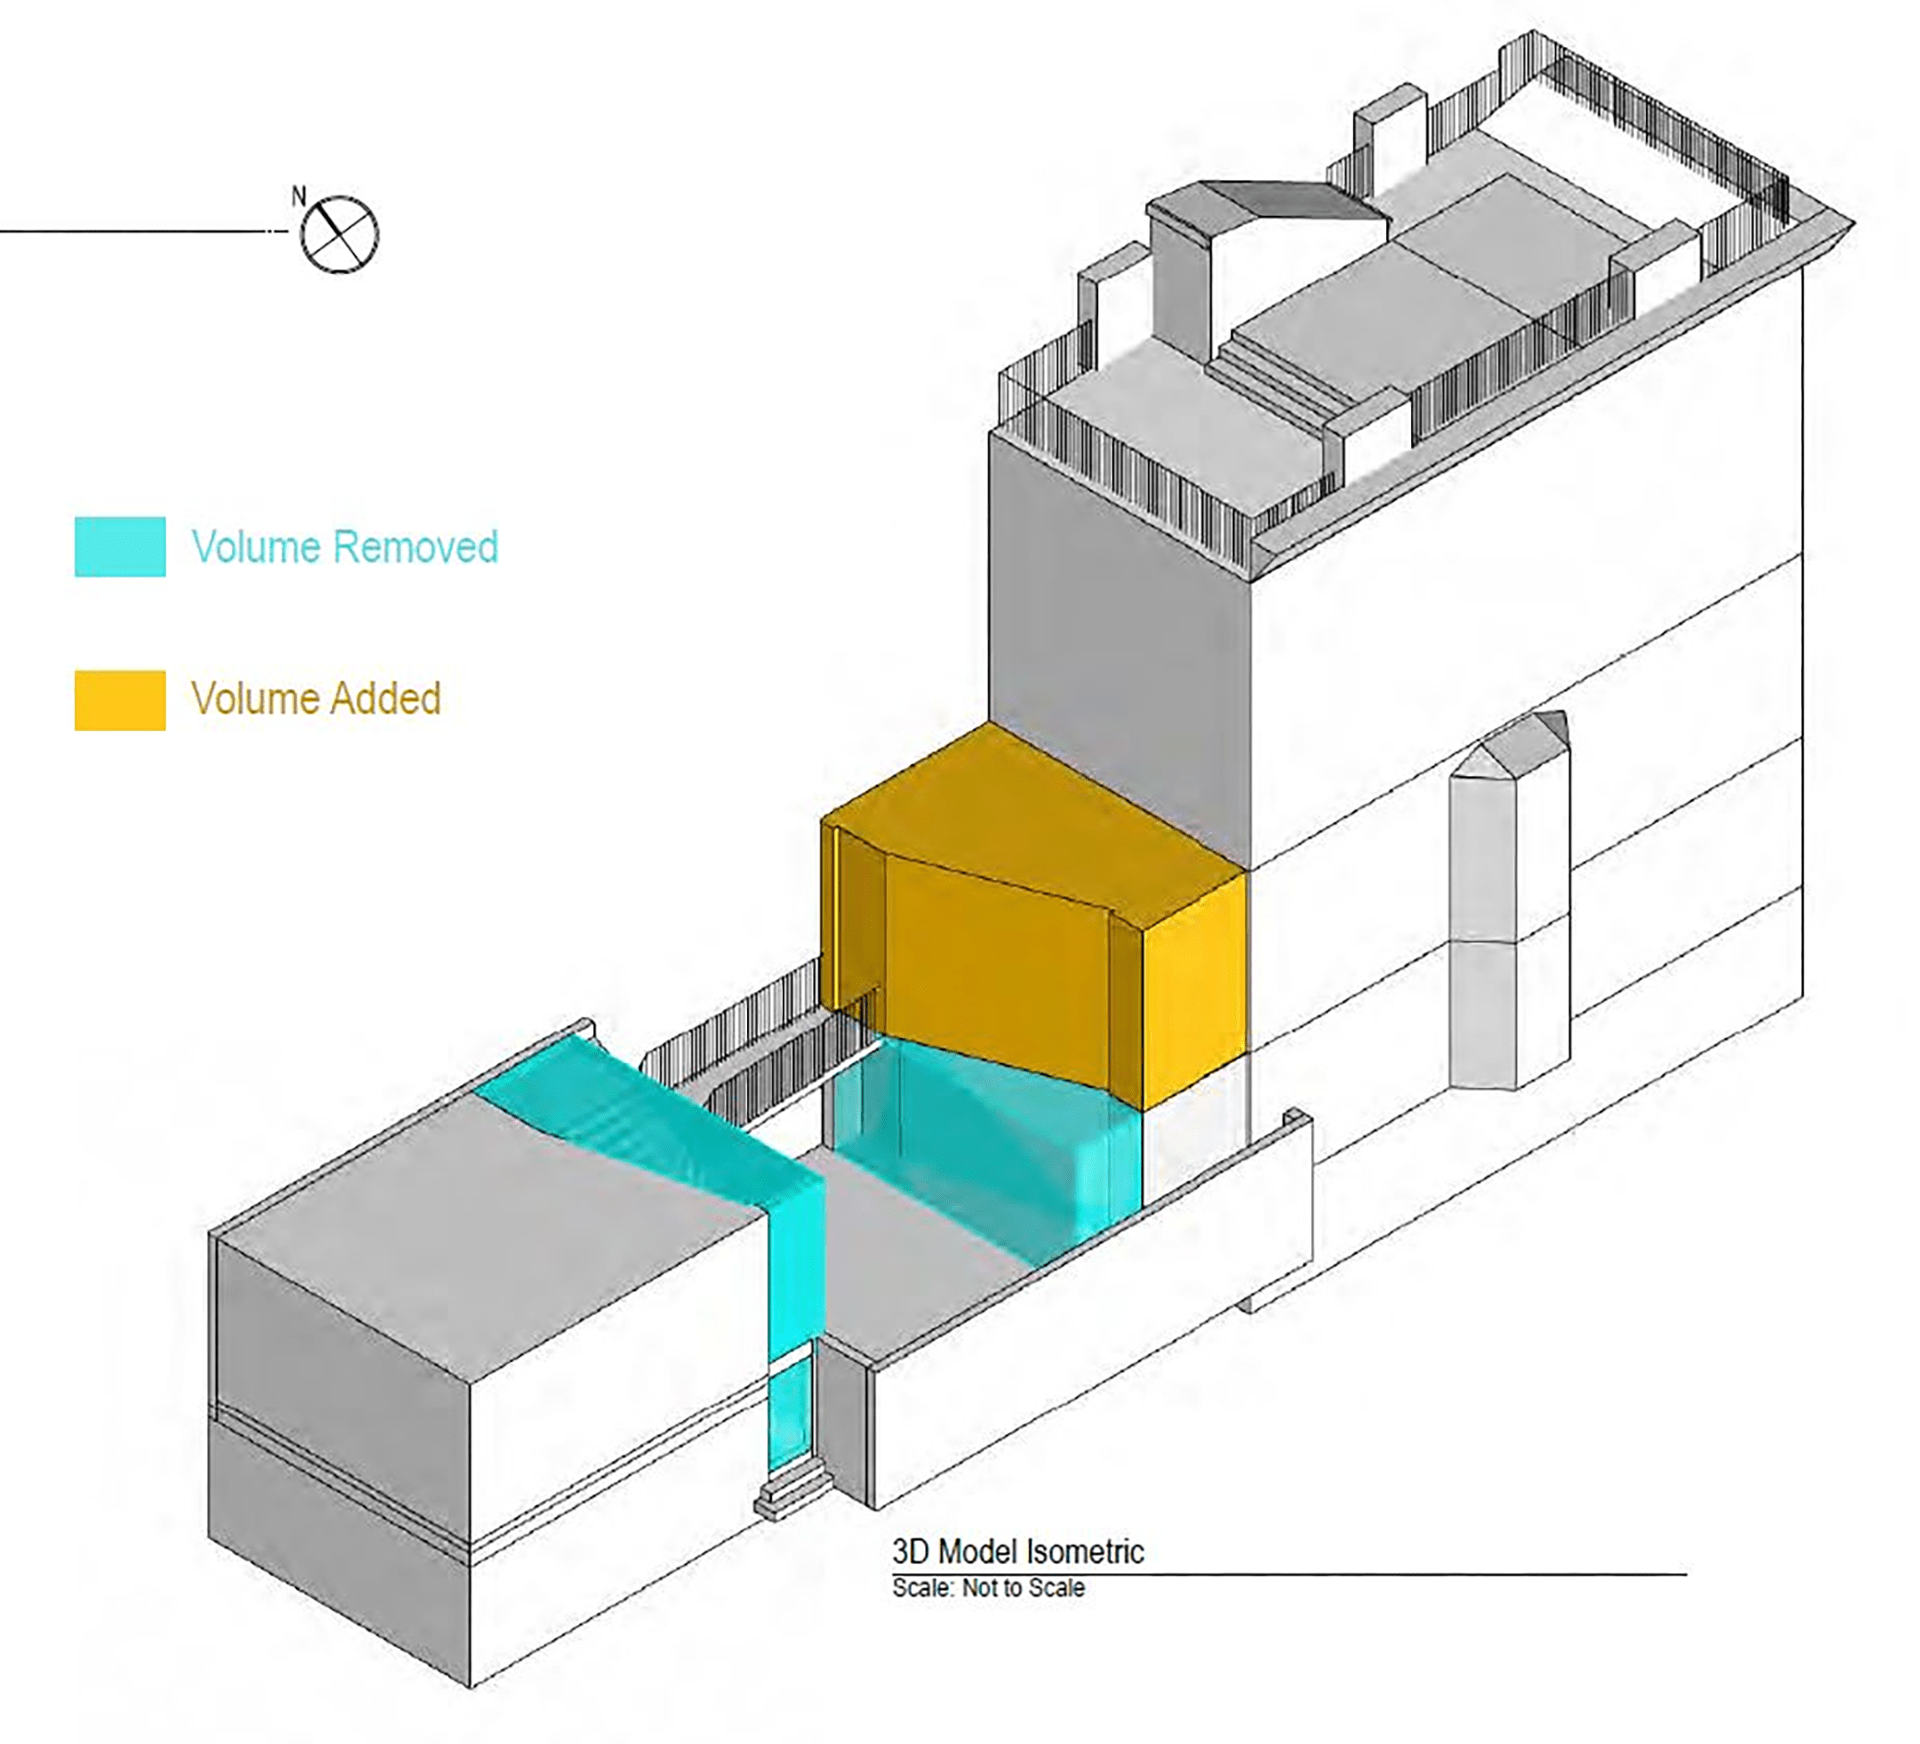 Diagram illustrating where square footage was added and removed to reallocate space in a Park Slope corner home.